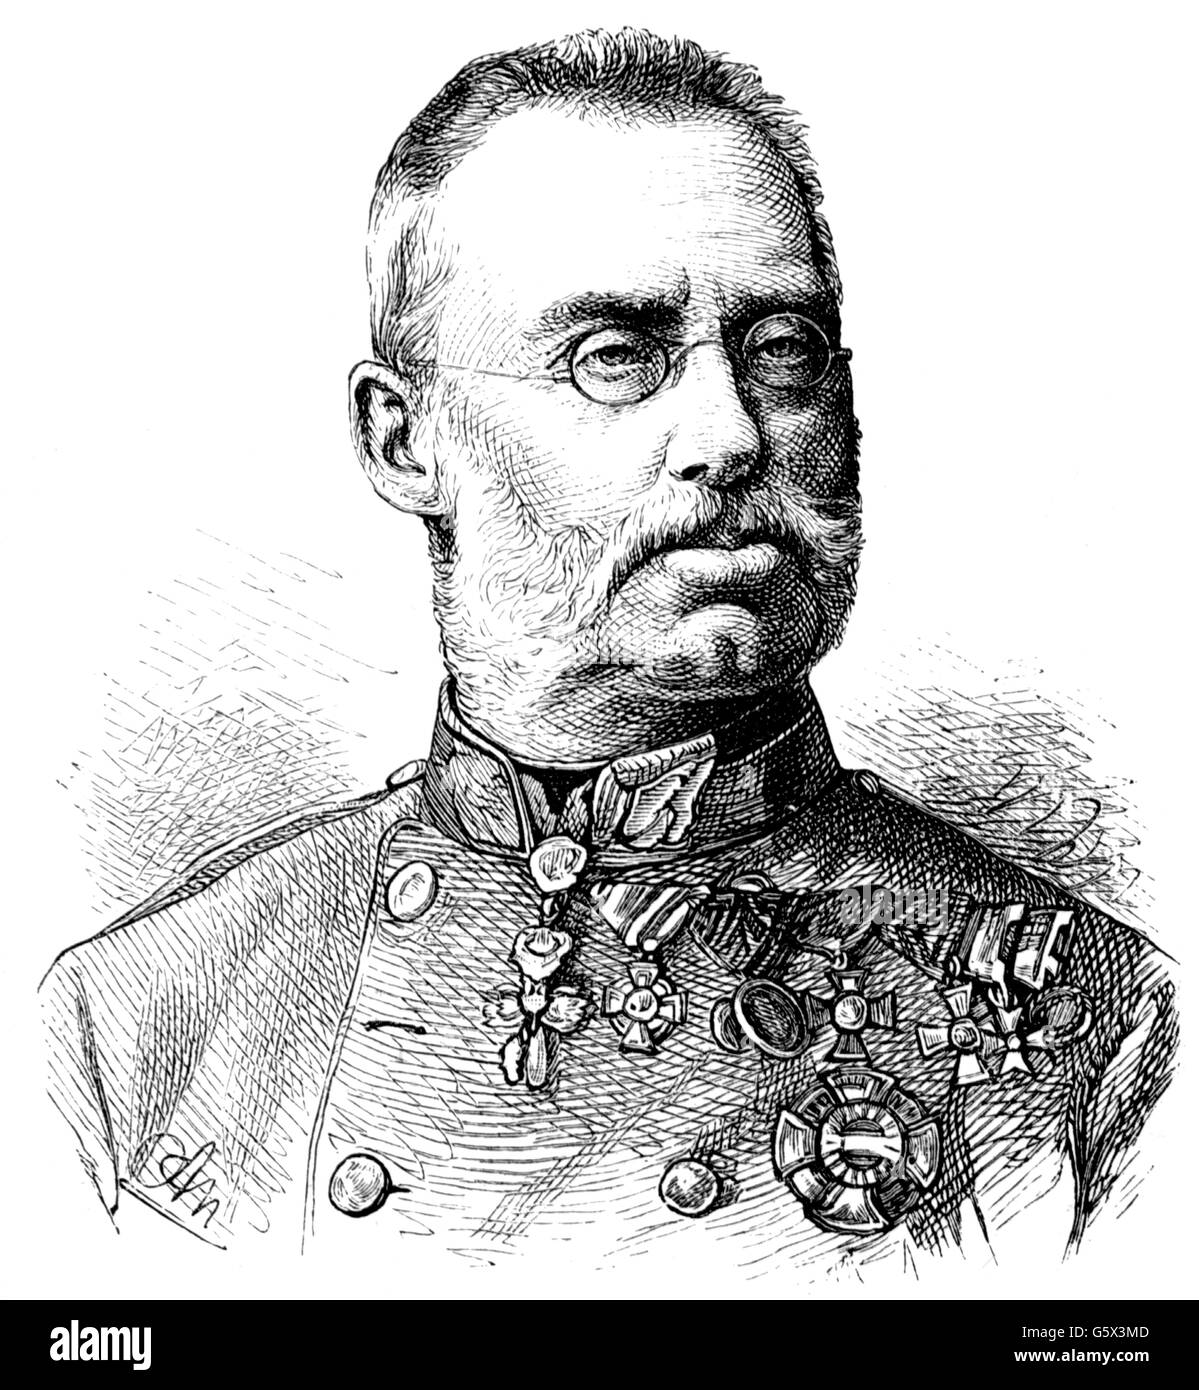 Albrecht, 3.8.1817 - 18.2.1895, Archduke of Austria, Austrian general, inspector general of the Austro-Hungarian Army 1868 - 1895, portrait, wood engraving by Adolf Neumann, 2nd half 19th century, , Stock Photo